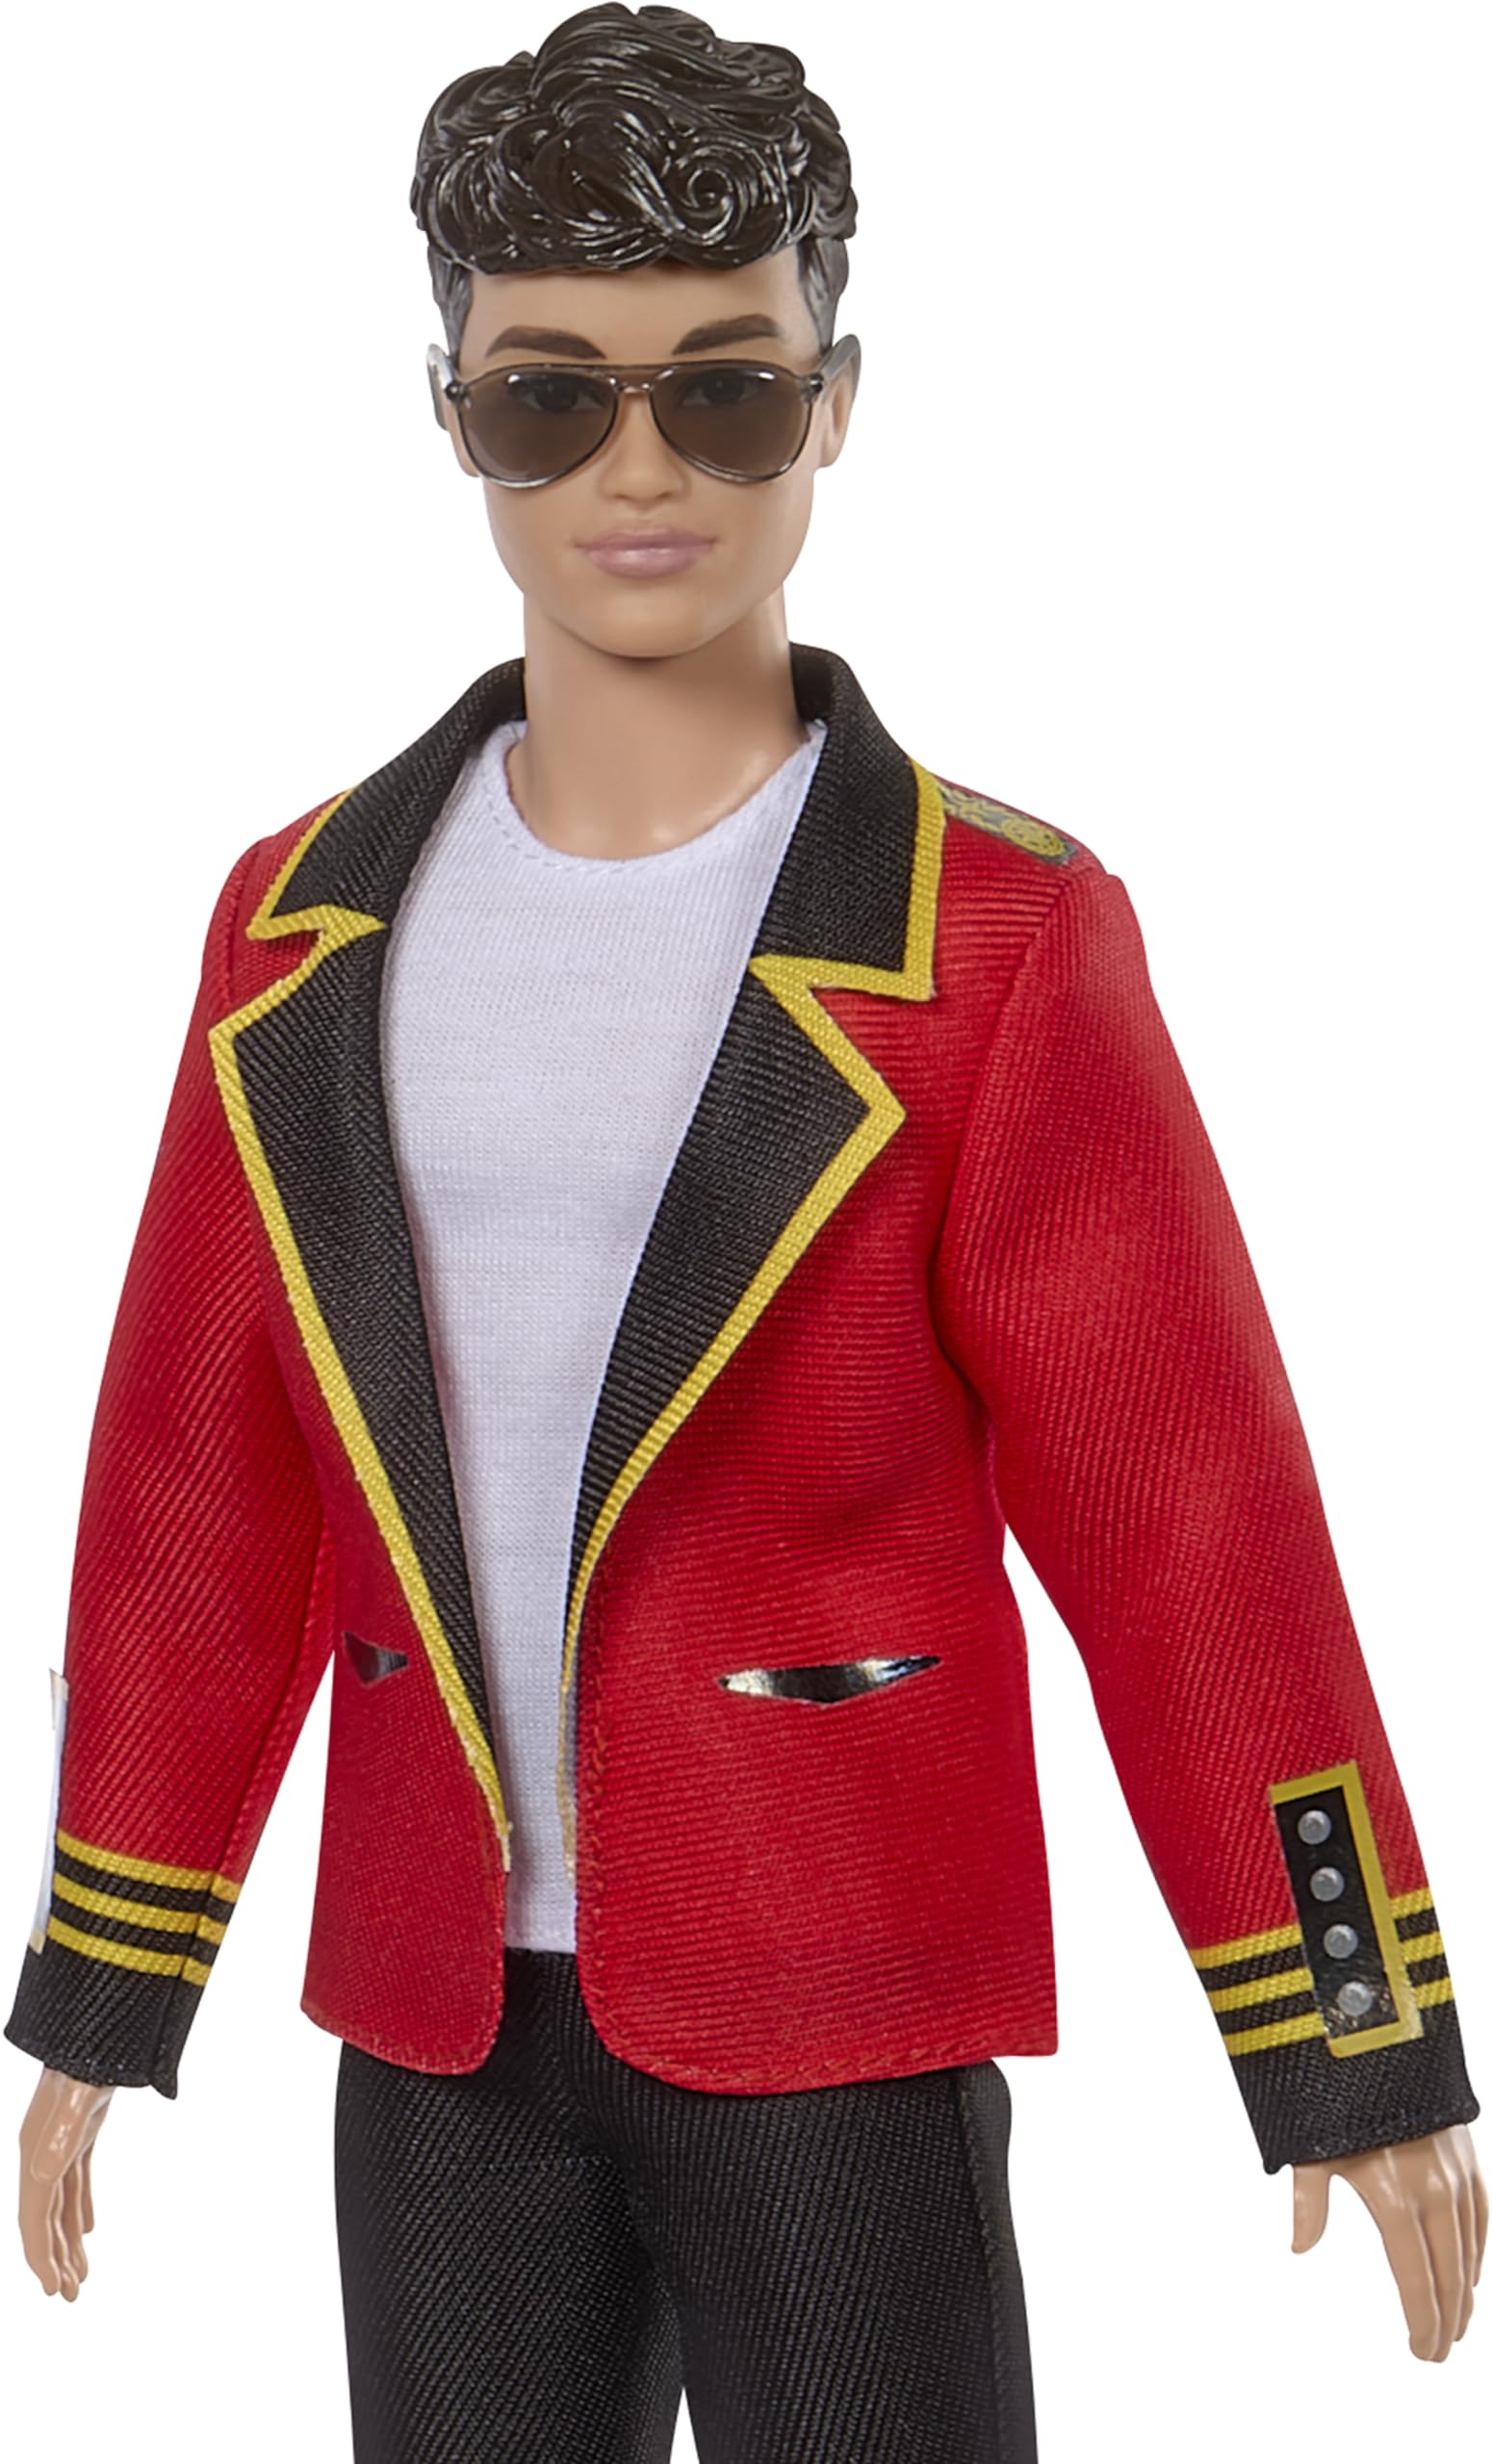 Barbie RBD Set of 5 Fashion Dolls with Roberta, Mia, Lupita, Diego & Giovanni in Removable Concert Looks, Rebelde Band Collectible